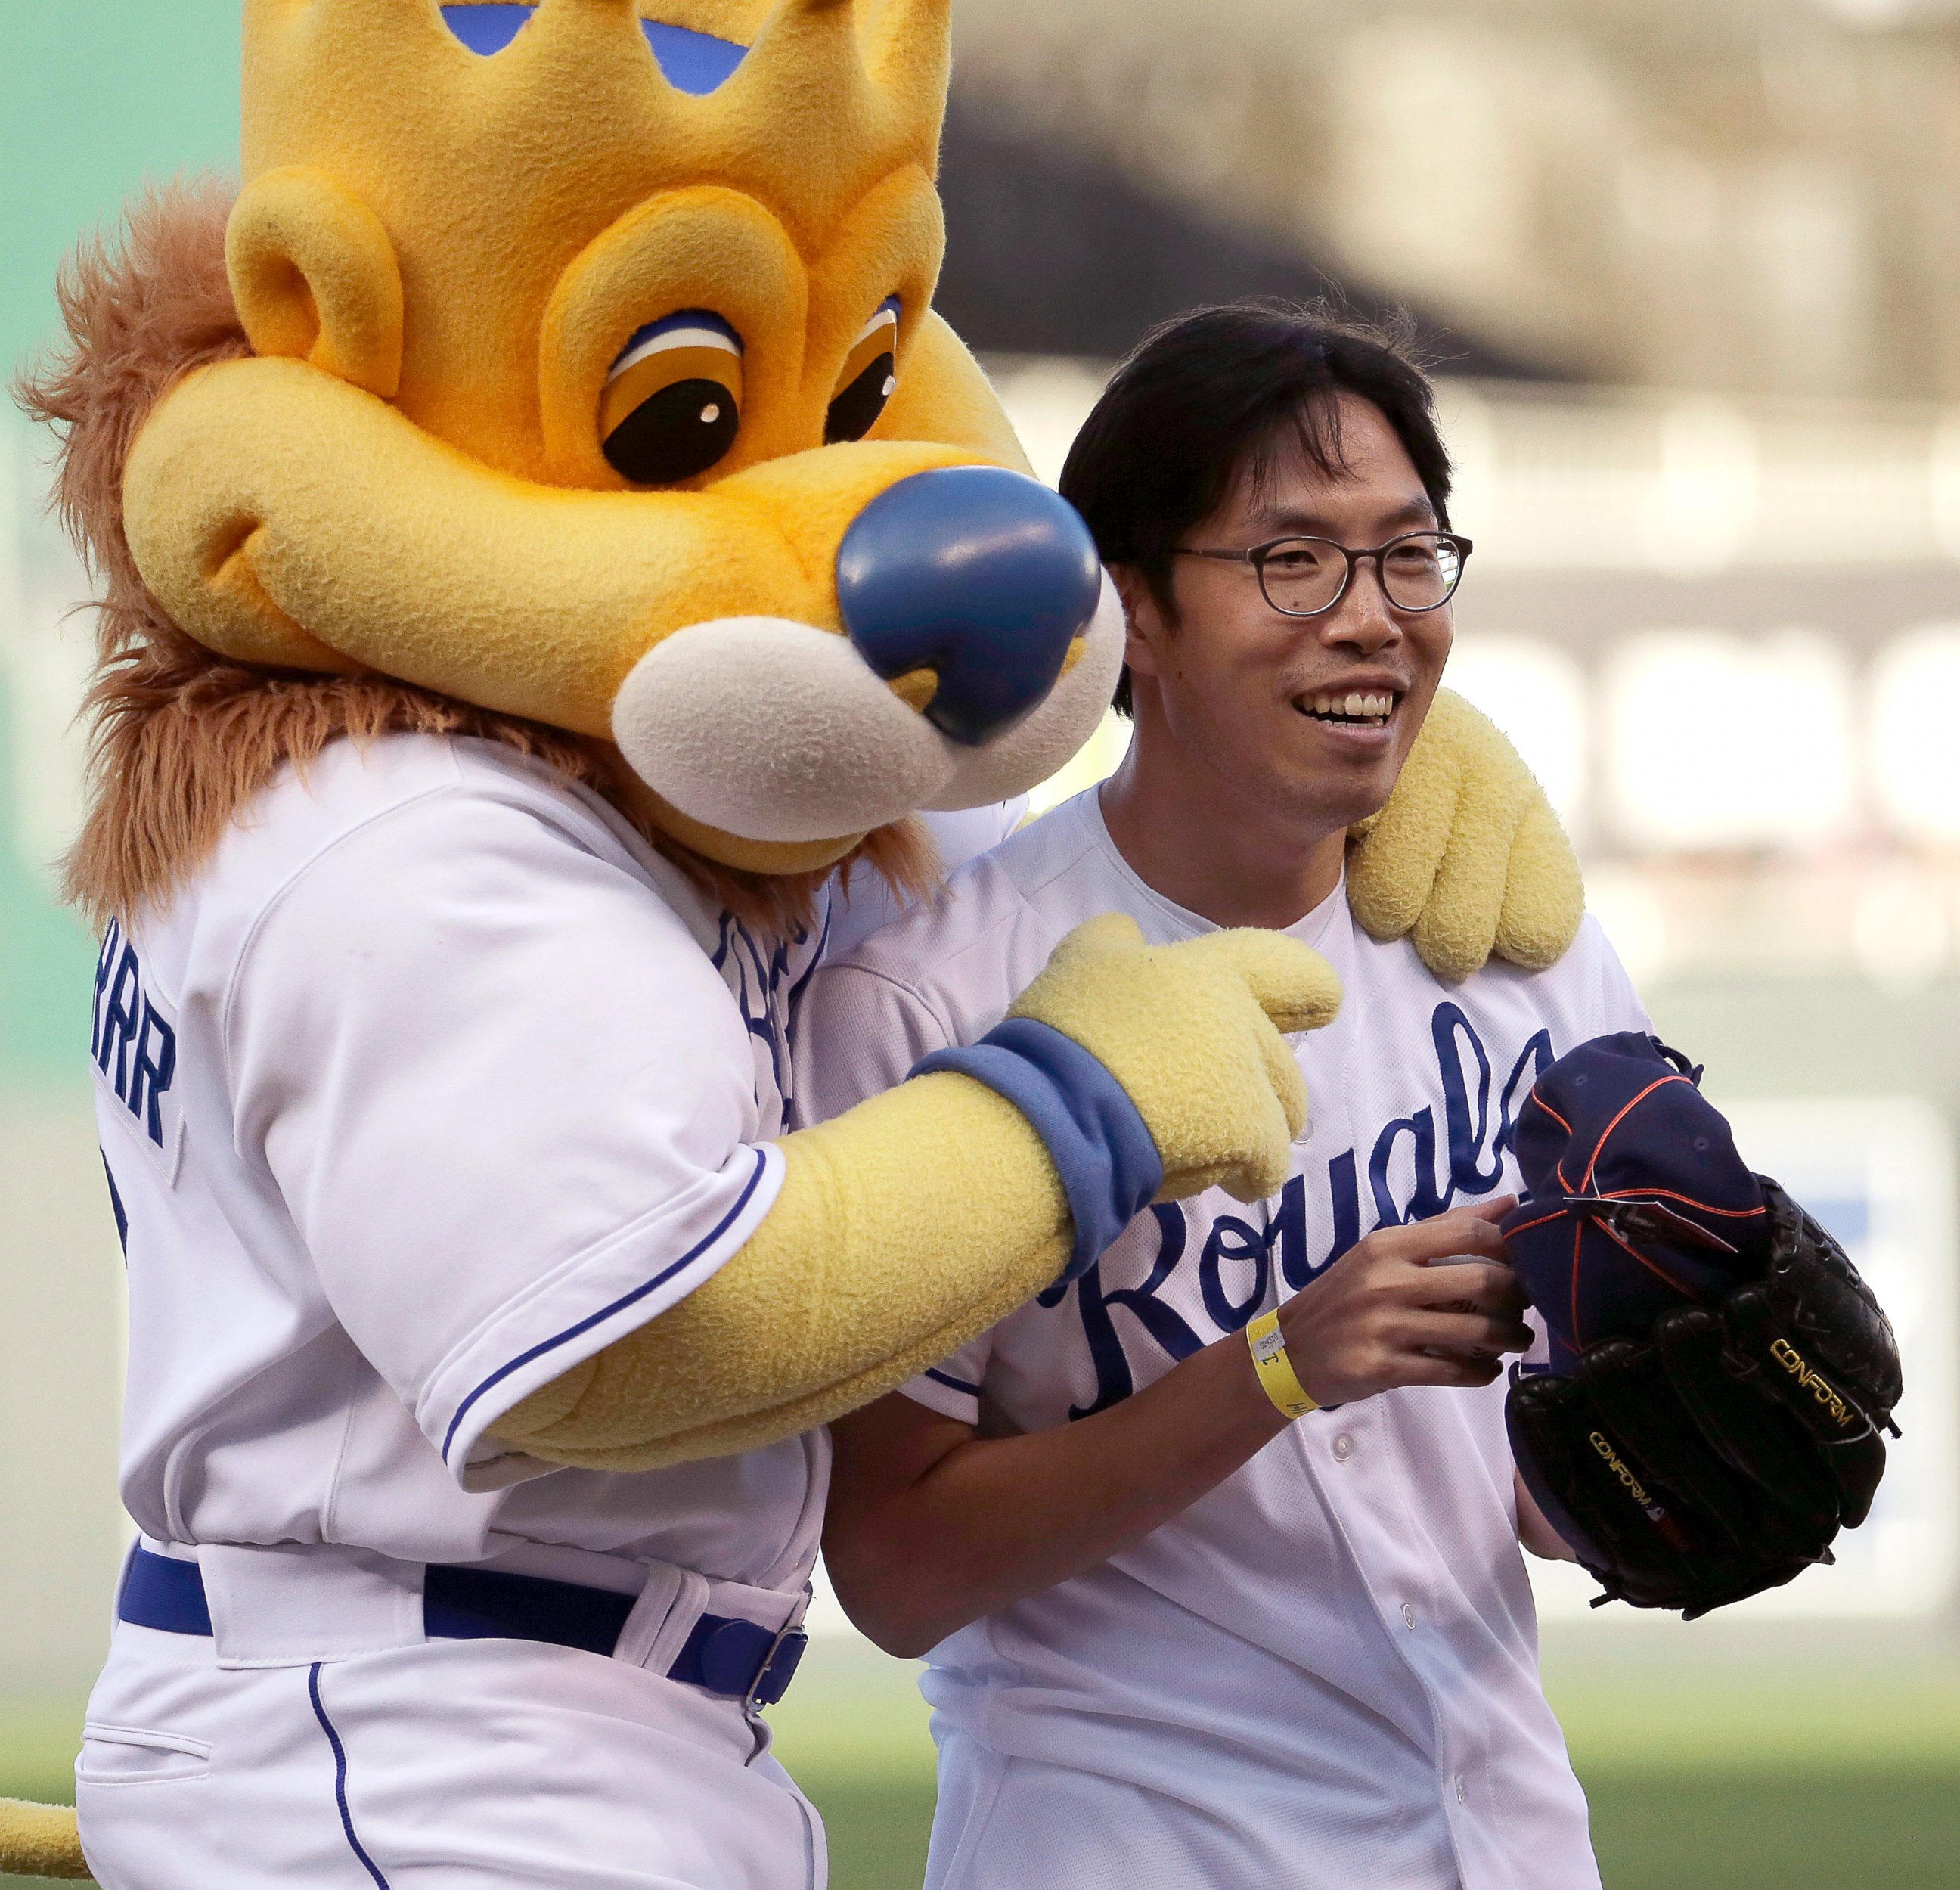 PHOTO: Longtime Kansas City Royals fan Sung Woo Lee, from South Korea, celebrates with Royals mascot Sluggerrr after throwing out the ceremonial first pitch before a baseball game against the Oakland Athletics, Aug. 11, 2014, in Kansas City, Mo.